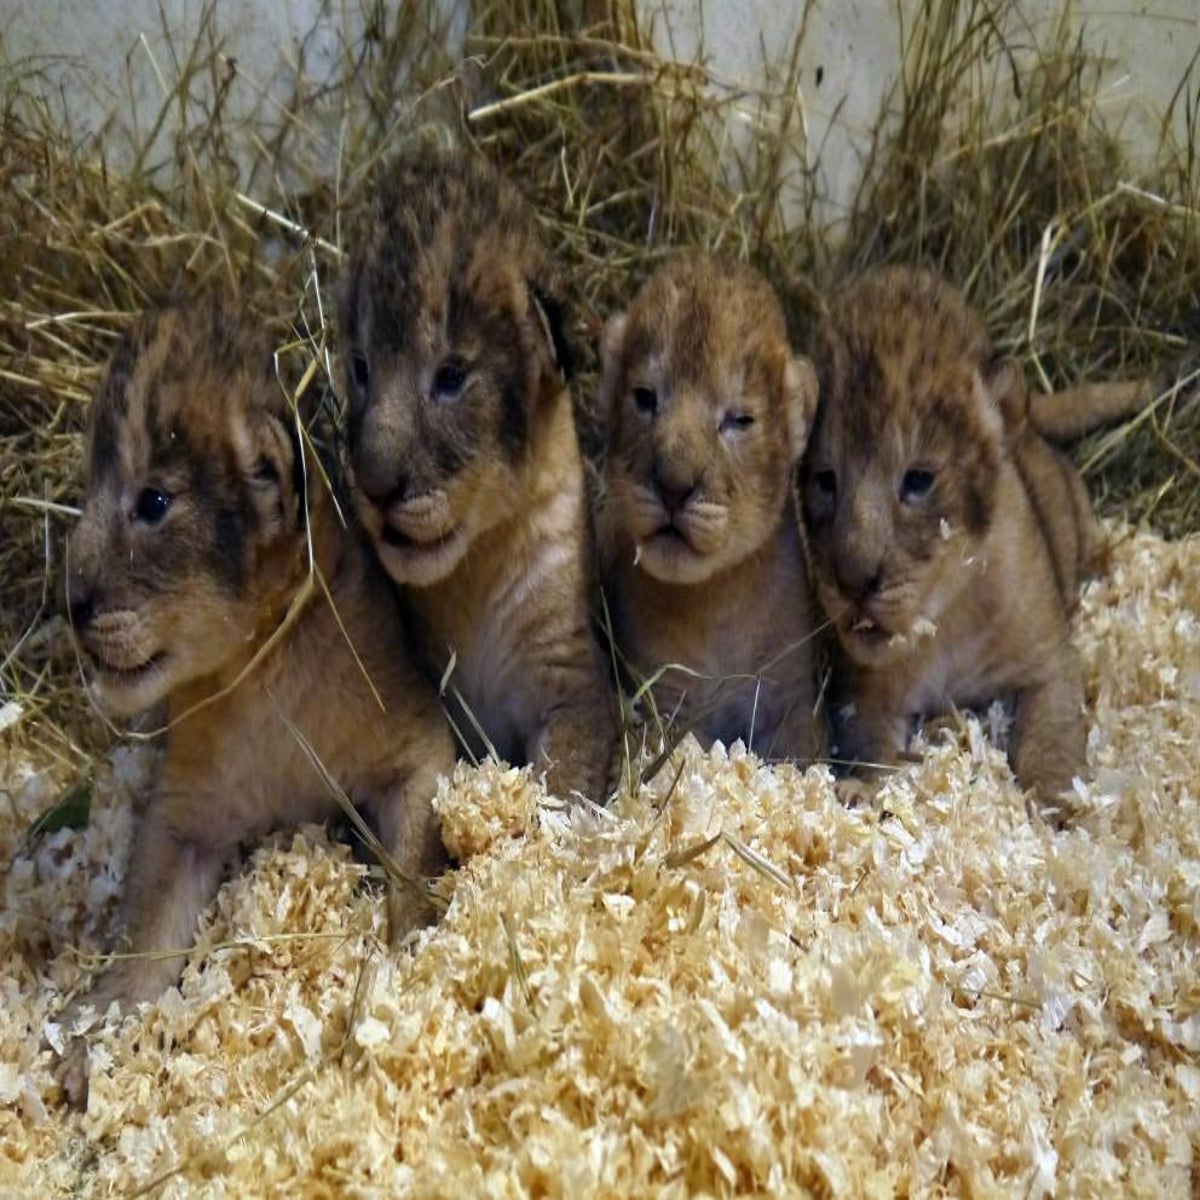 Swedish zoo admits killing nine healthy lion cubs because they became ' surplus' animals | The Independent | The Independent